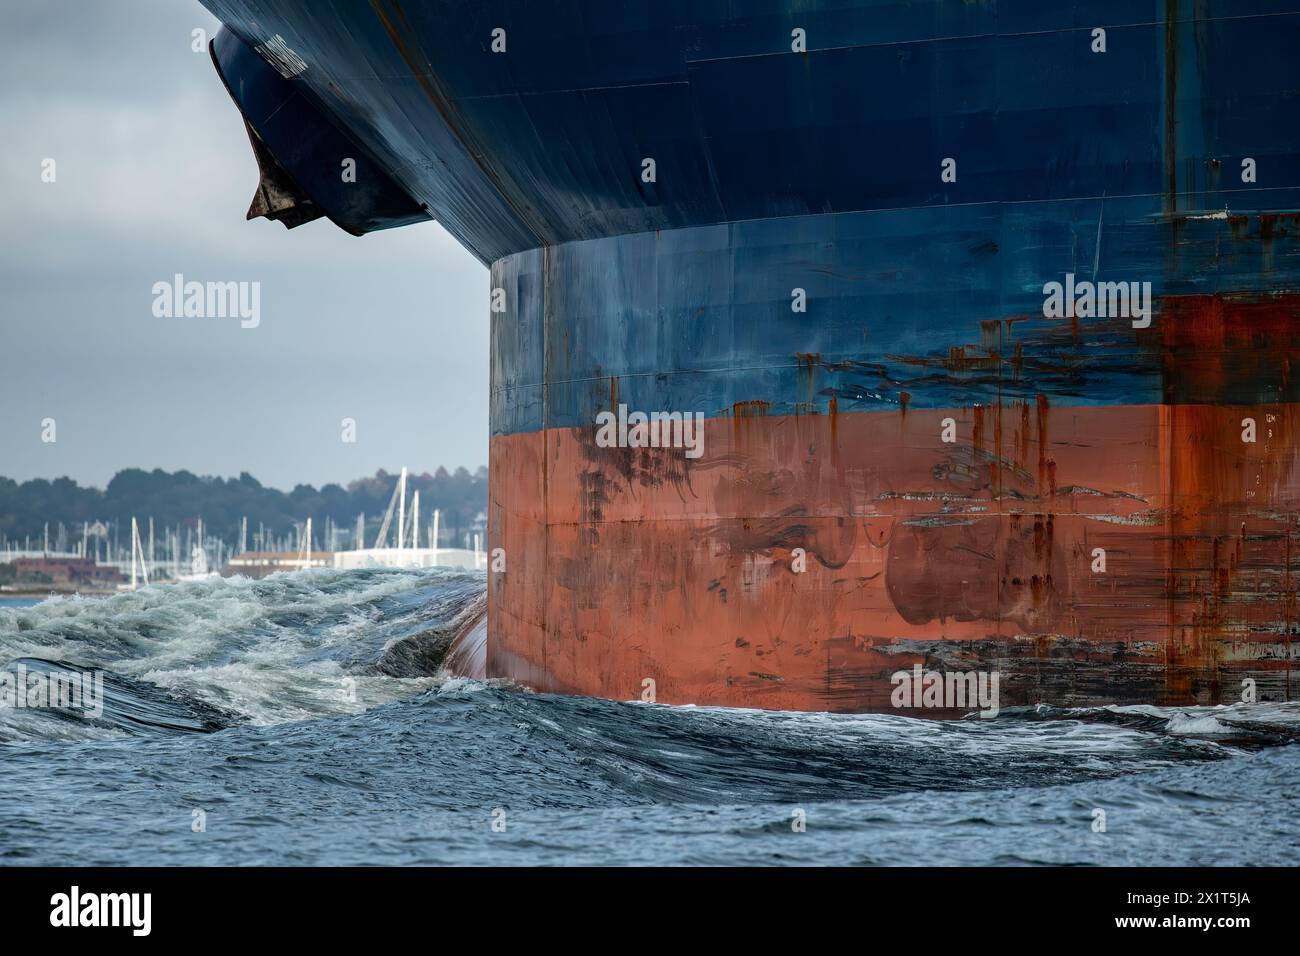 Big blue container ships bow with rusty anchors pushes a giant bow wave through the ocean. Stock Photo